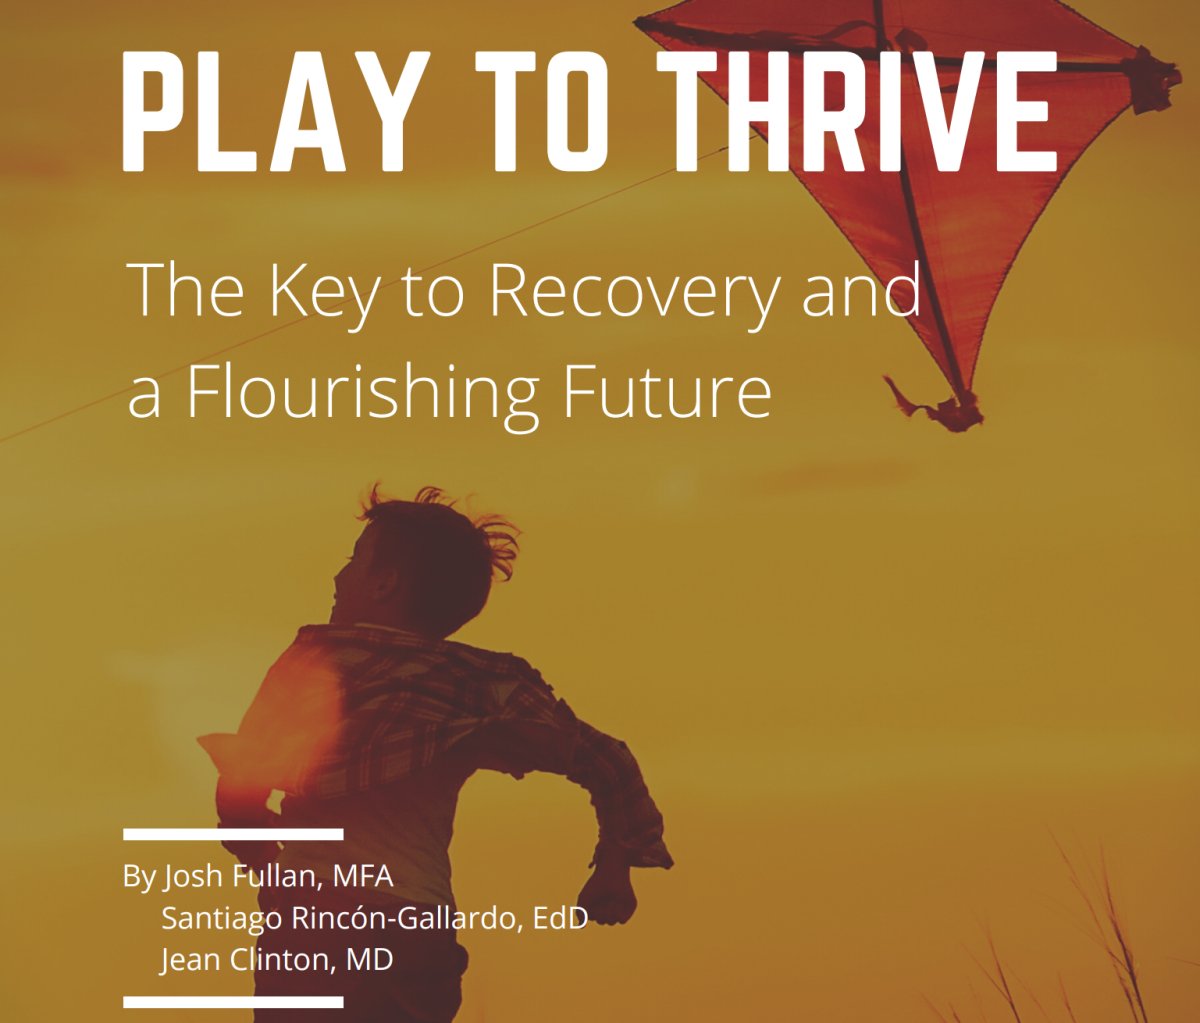 Survive the surge by embracing play. It’s not just for kids any more. article 1: deep-learning.global/wp-content/upl… and a second: maximumcity.ca/s/Play-To-Thri… @michaelfullan1 @joannequinn88 @maggardner @maxdrummy #NPDL #NavigatingUncertainty